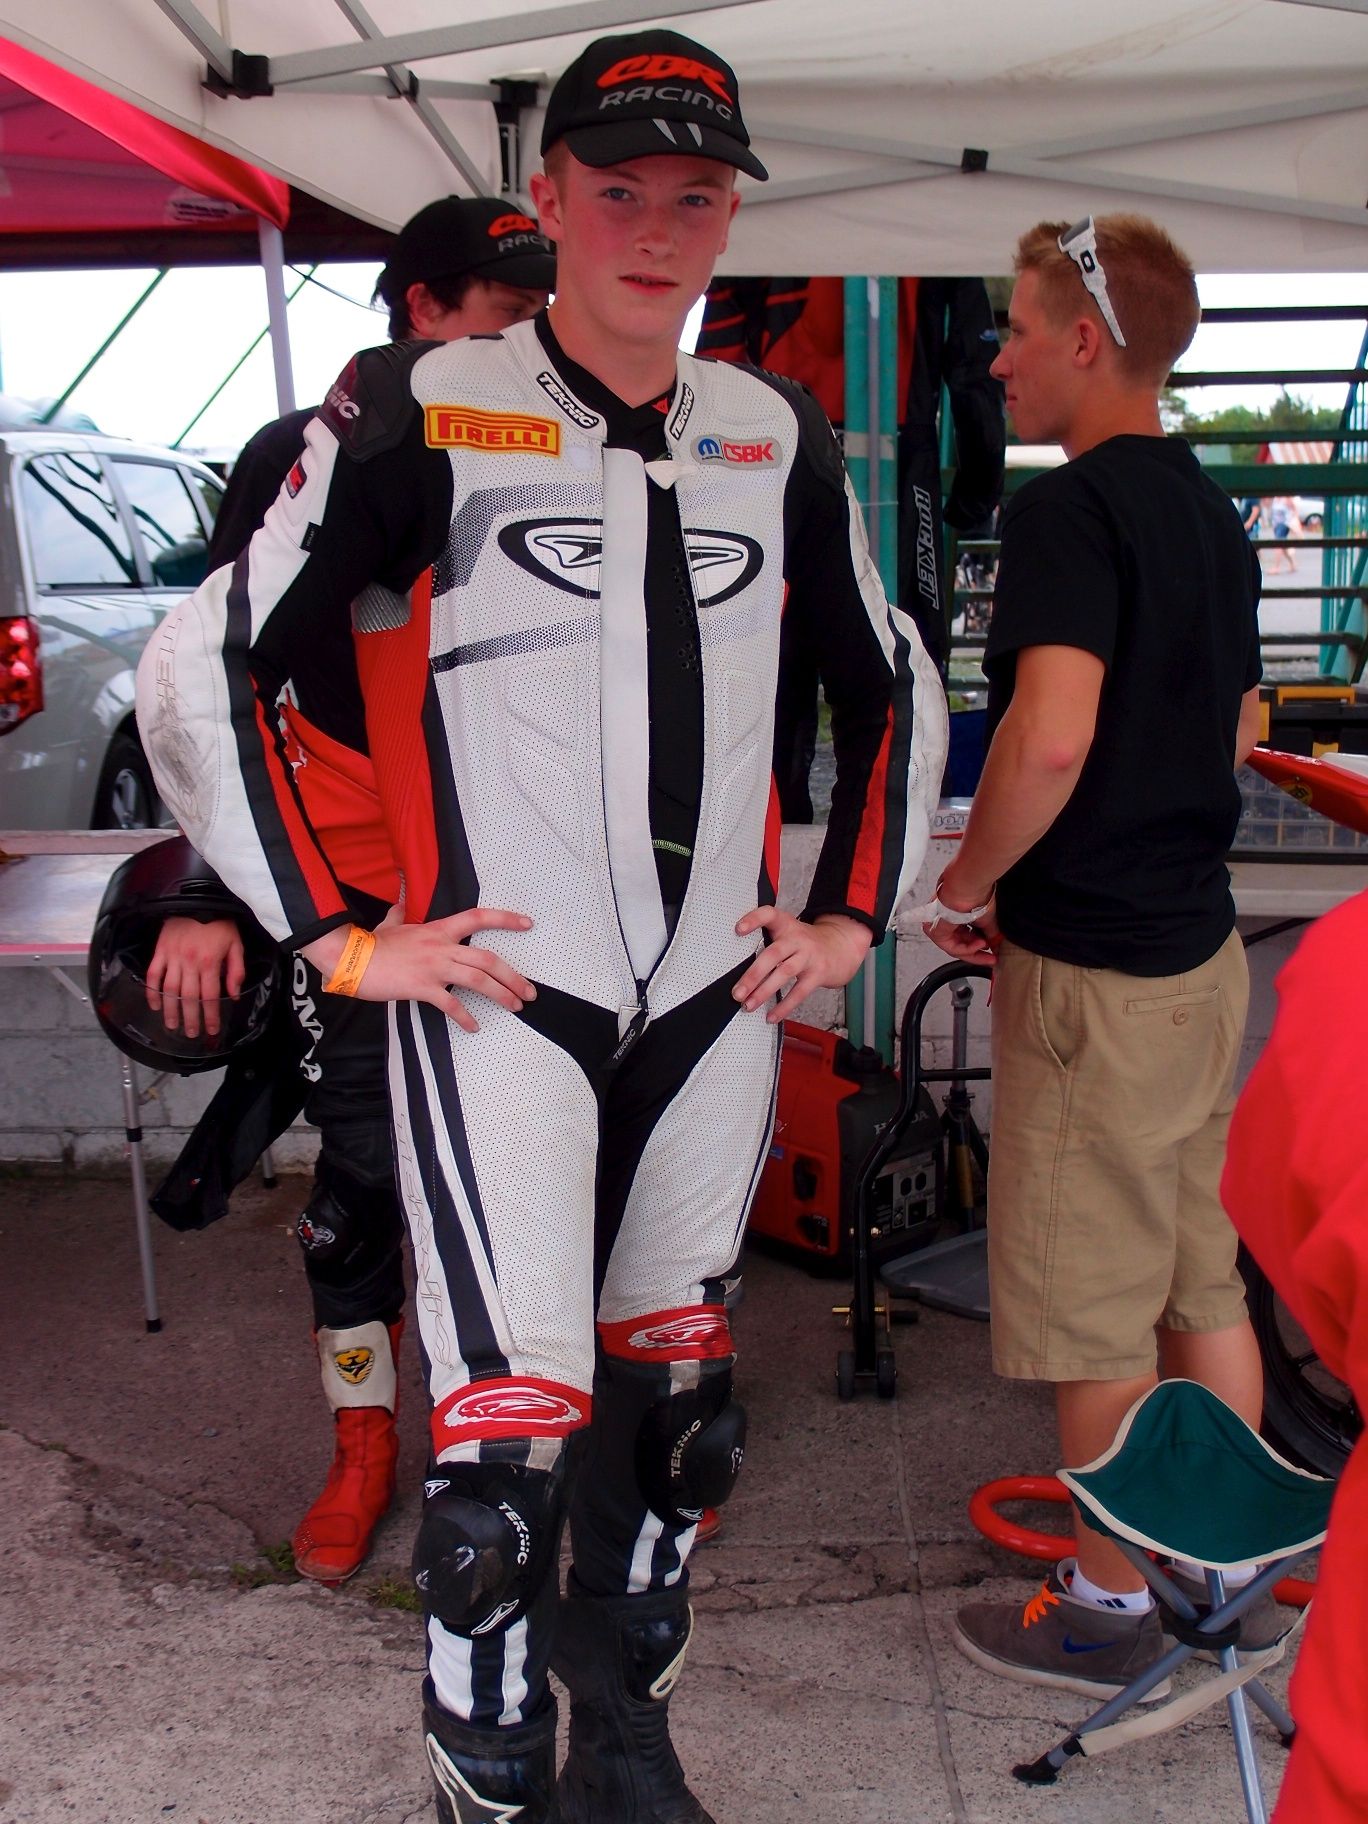 Sean Smith post race waiting in the pits for his race results